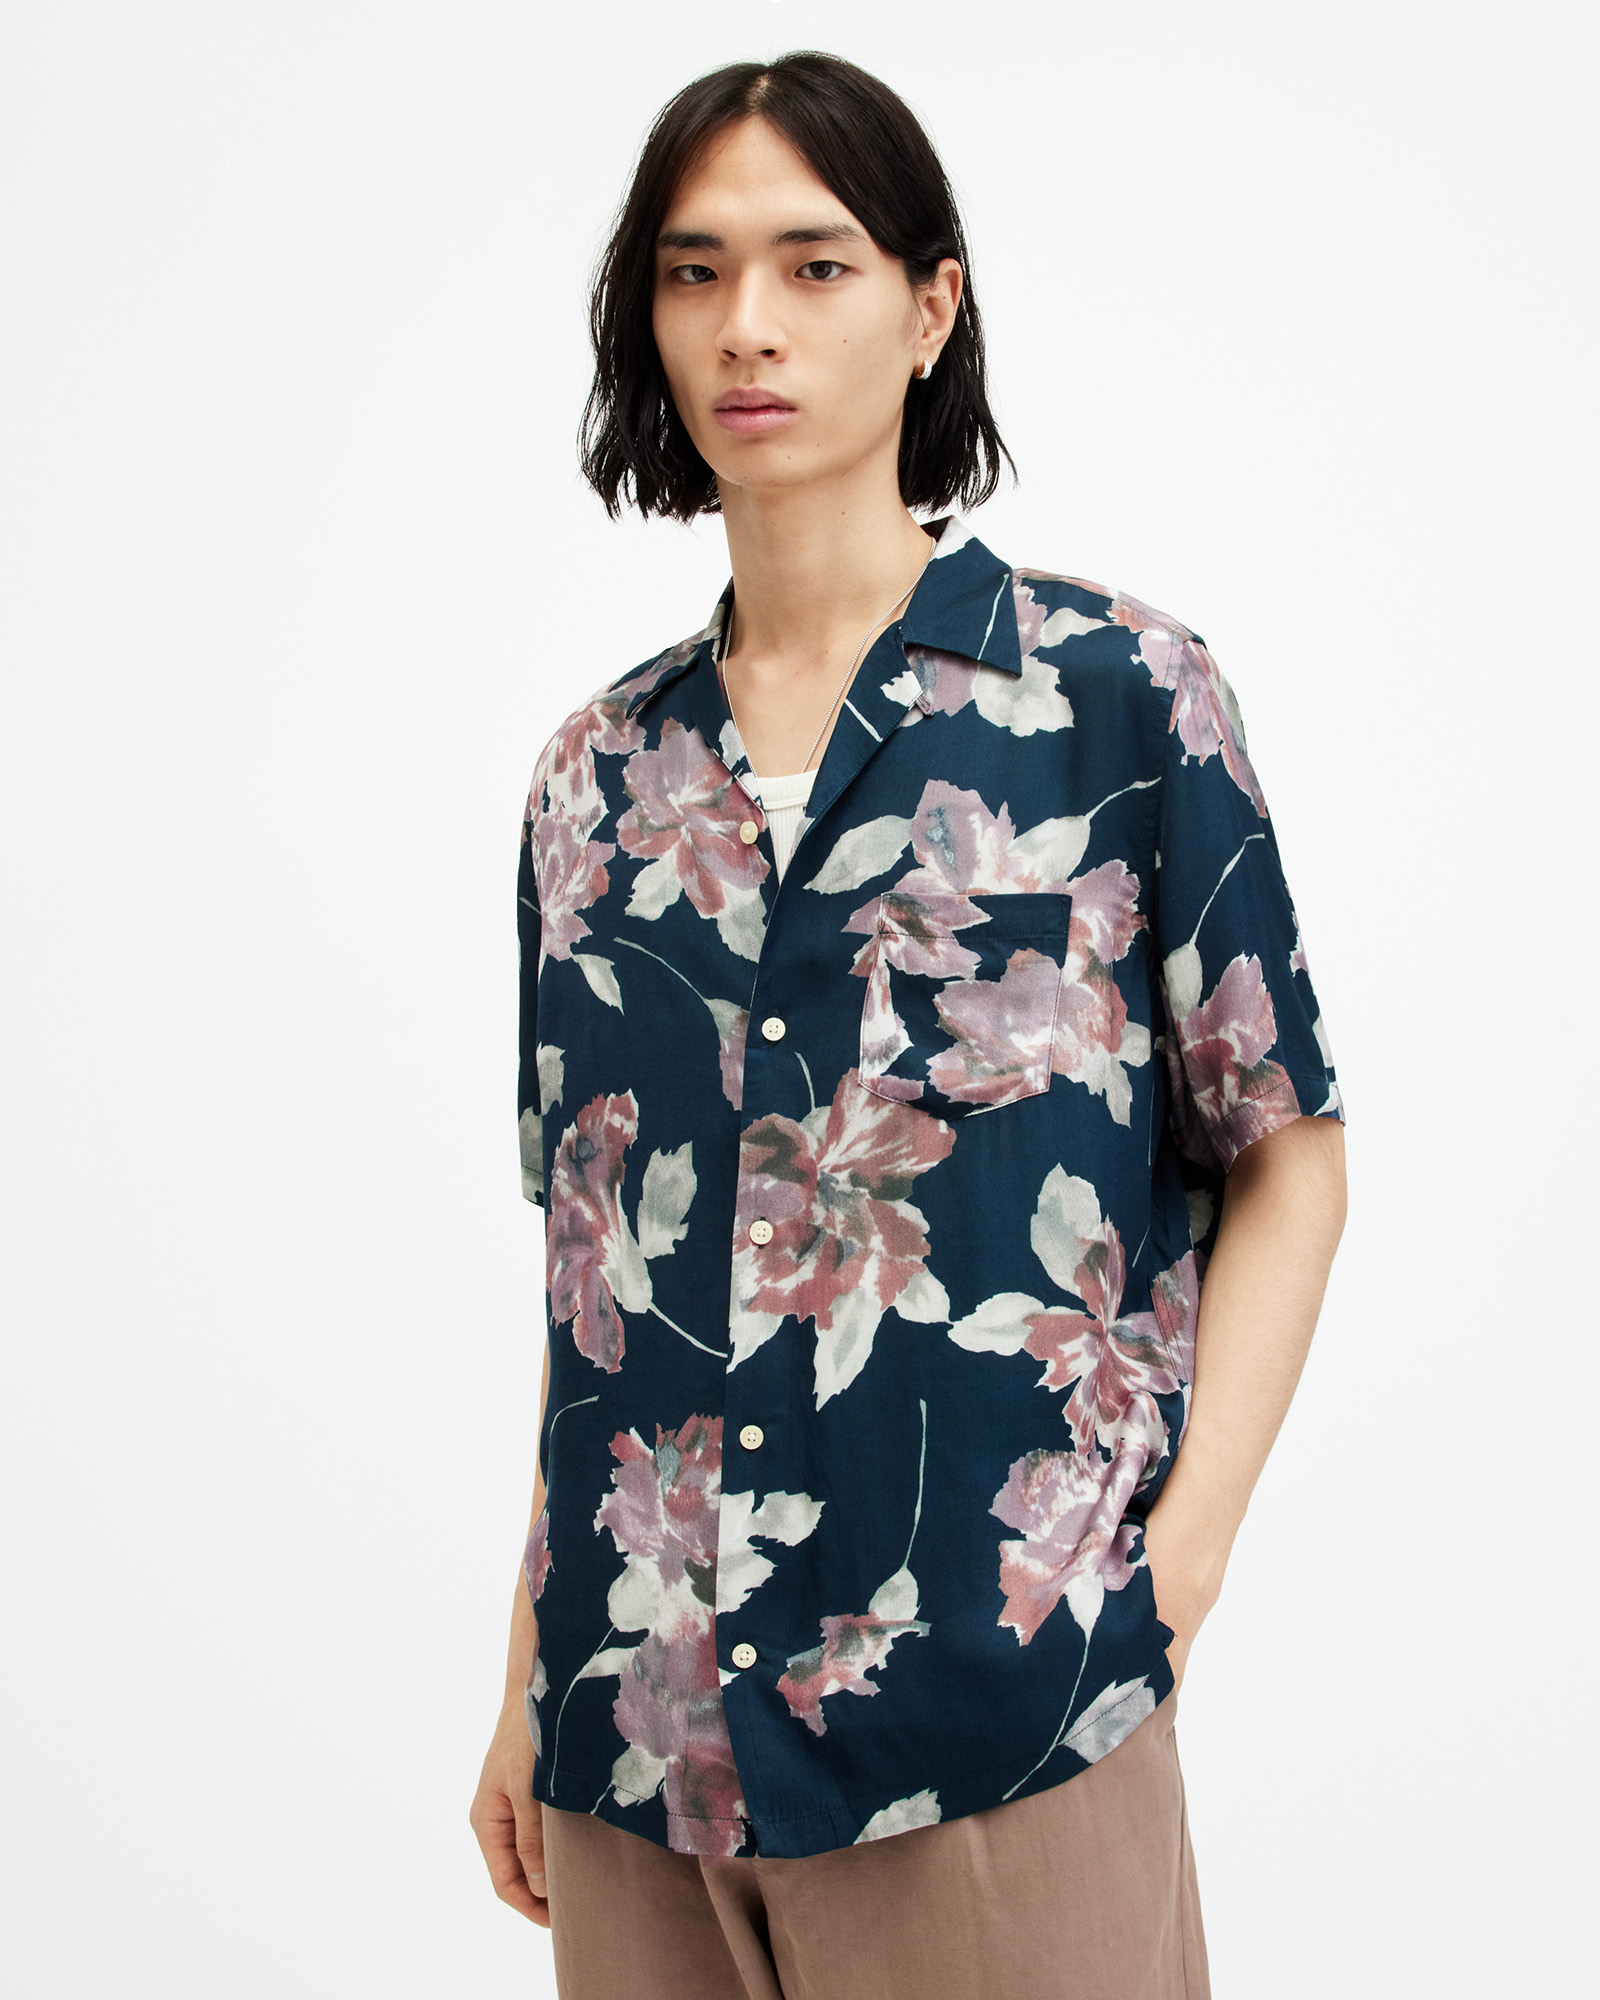 AllSaints Zinnia Floral Print Relaxed Fit Shirt,, ADMIRAL BLUE